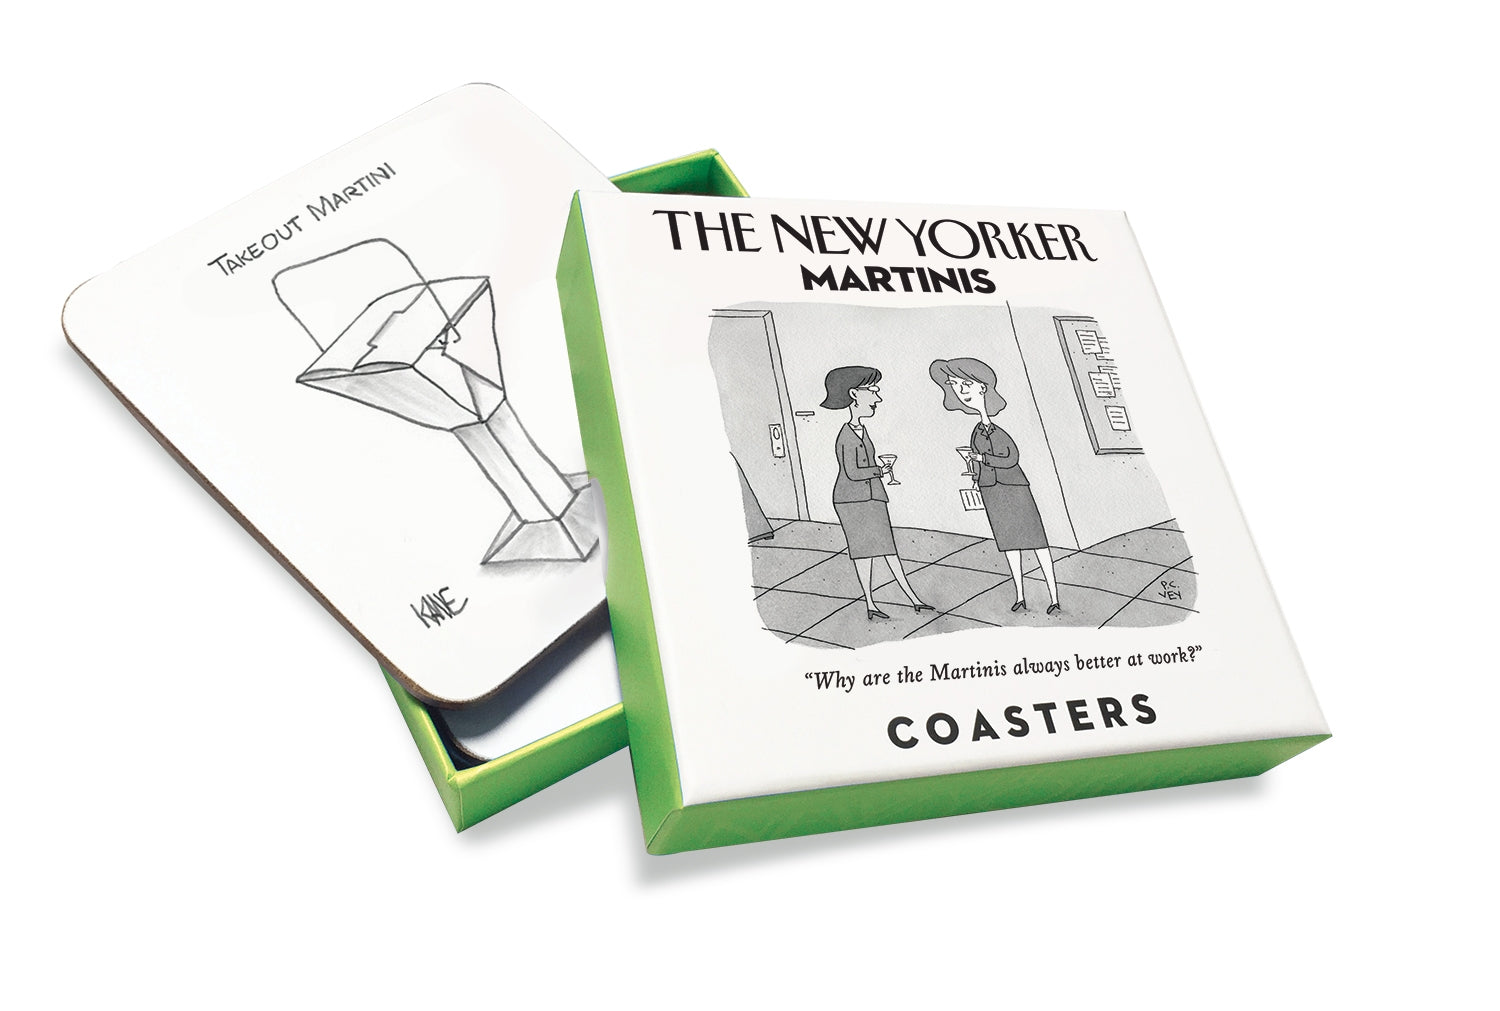 Martinis (By New Yorker) - Coasters